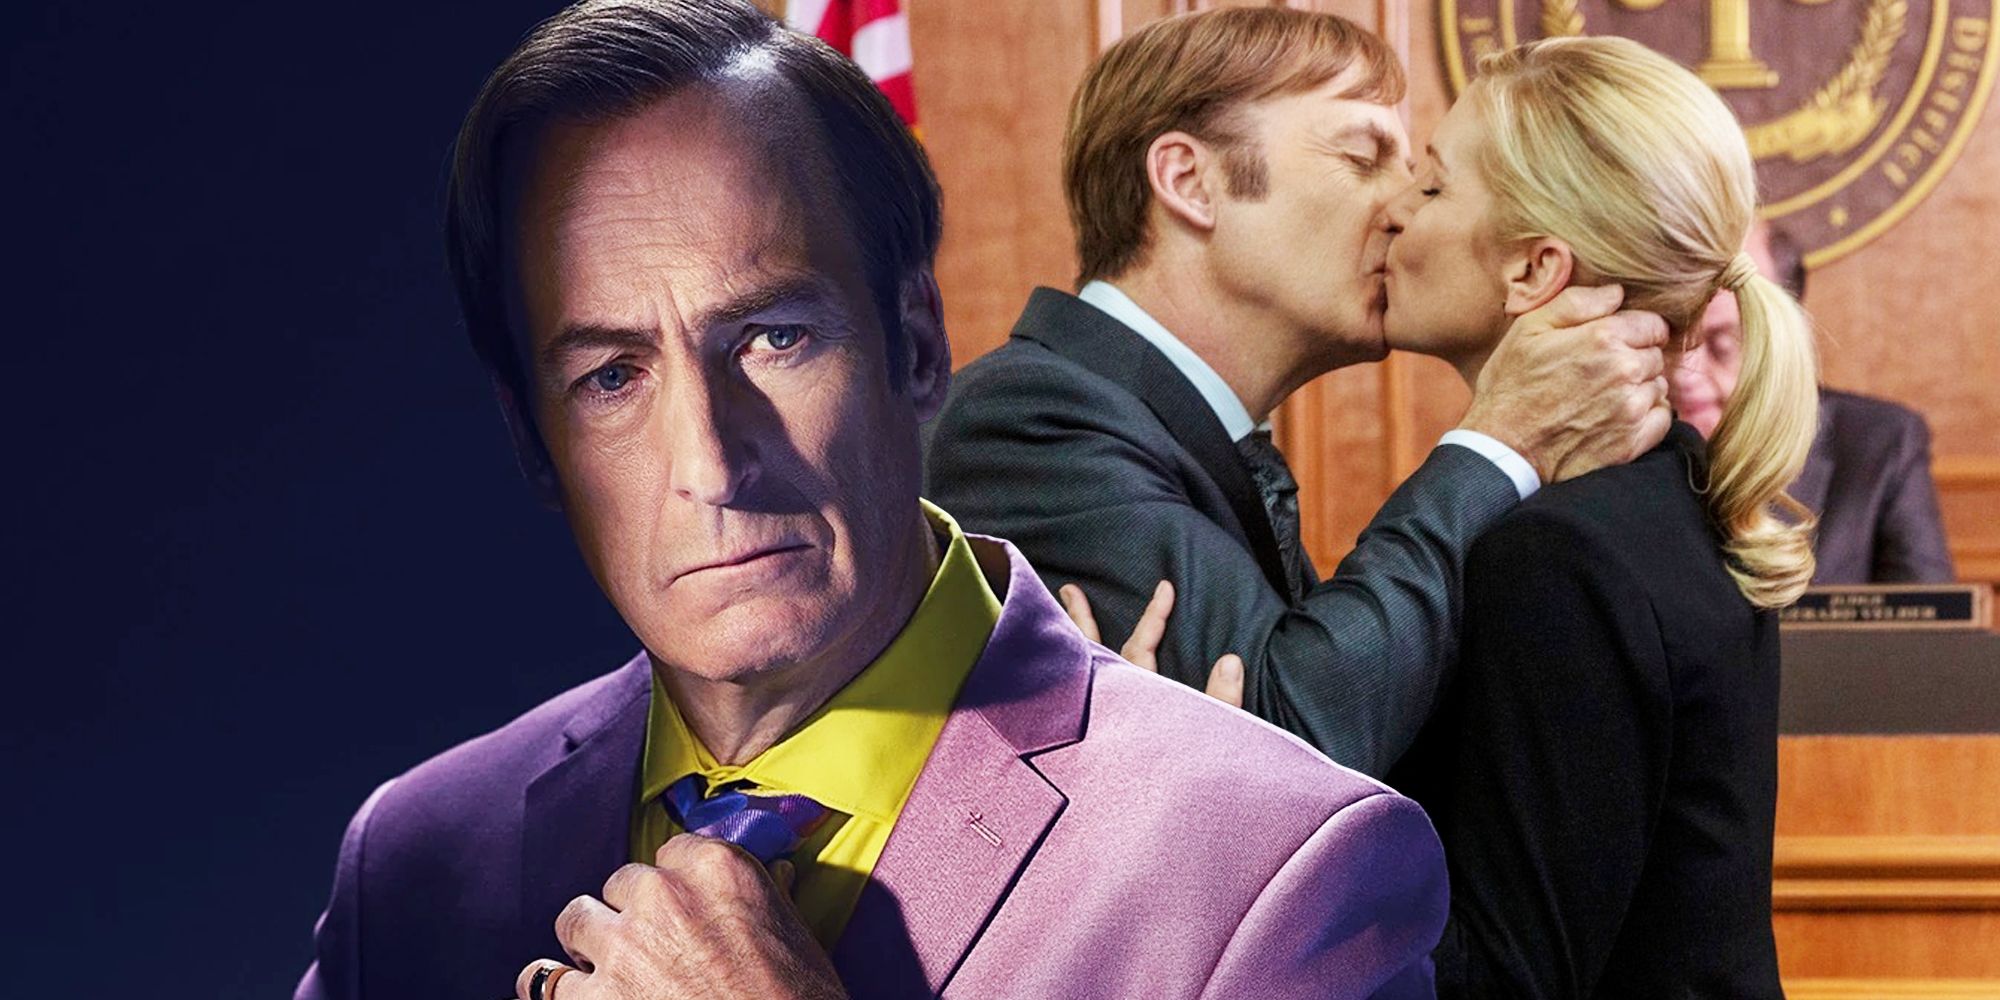 11 Most Important Better Call Saul Moments In Jimmy & Kim's Relationship